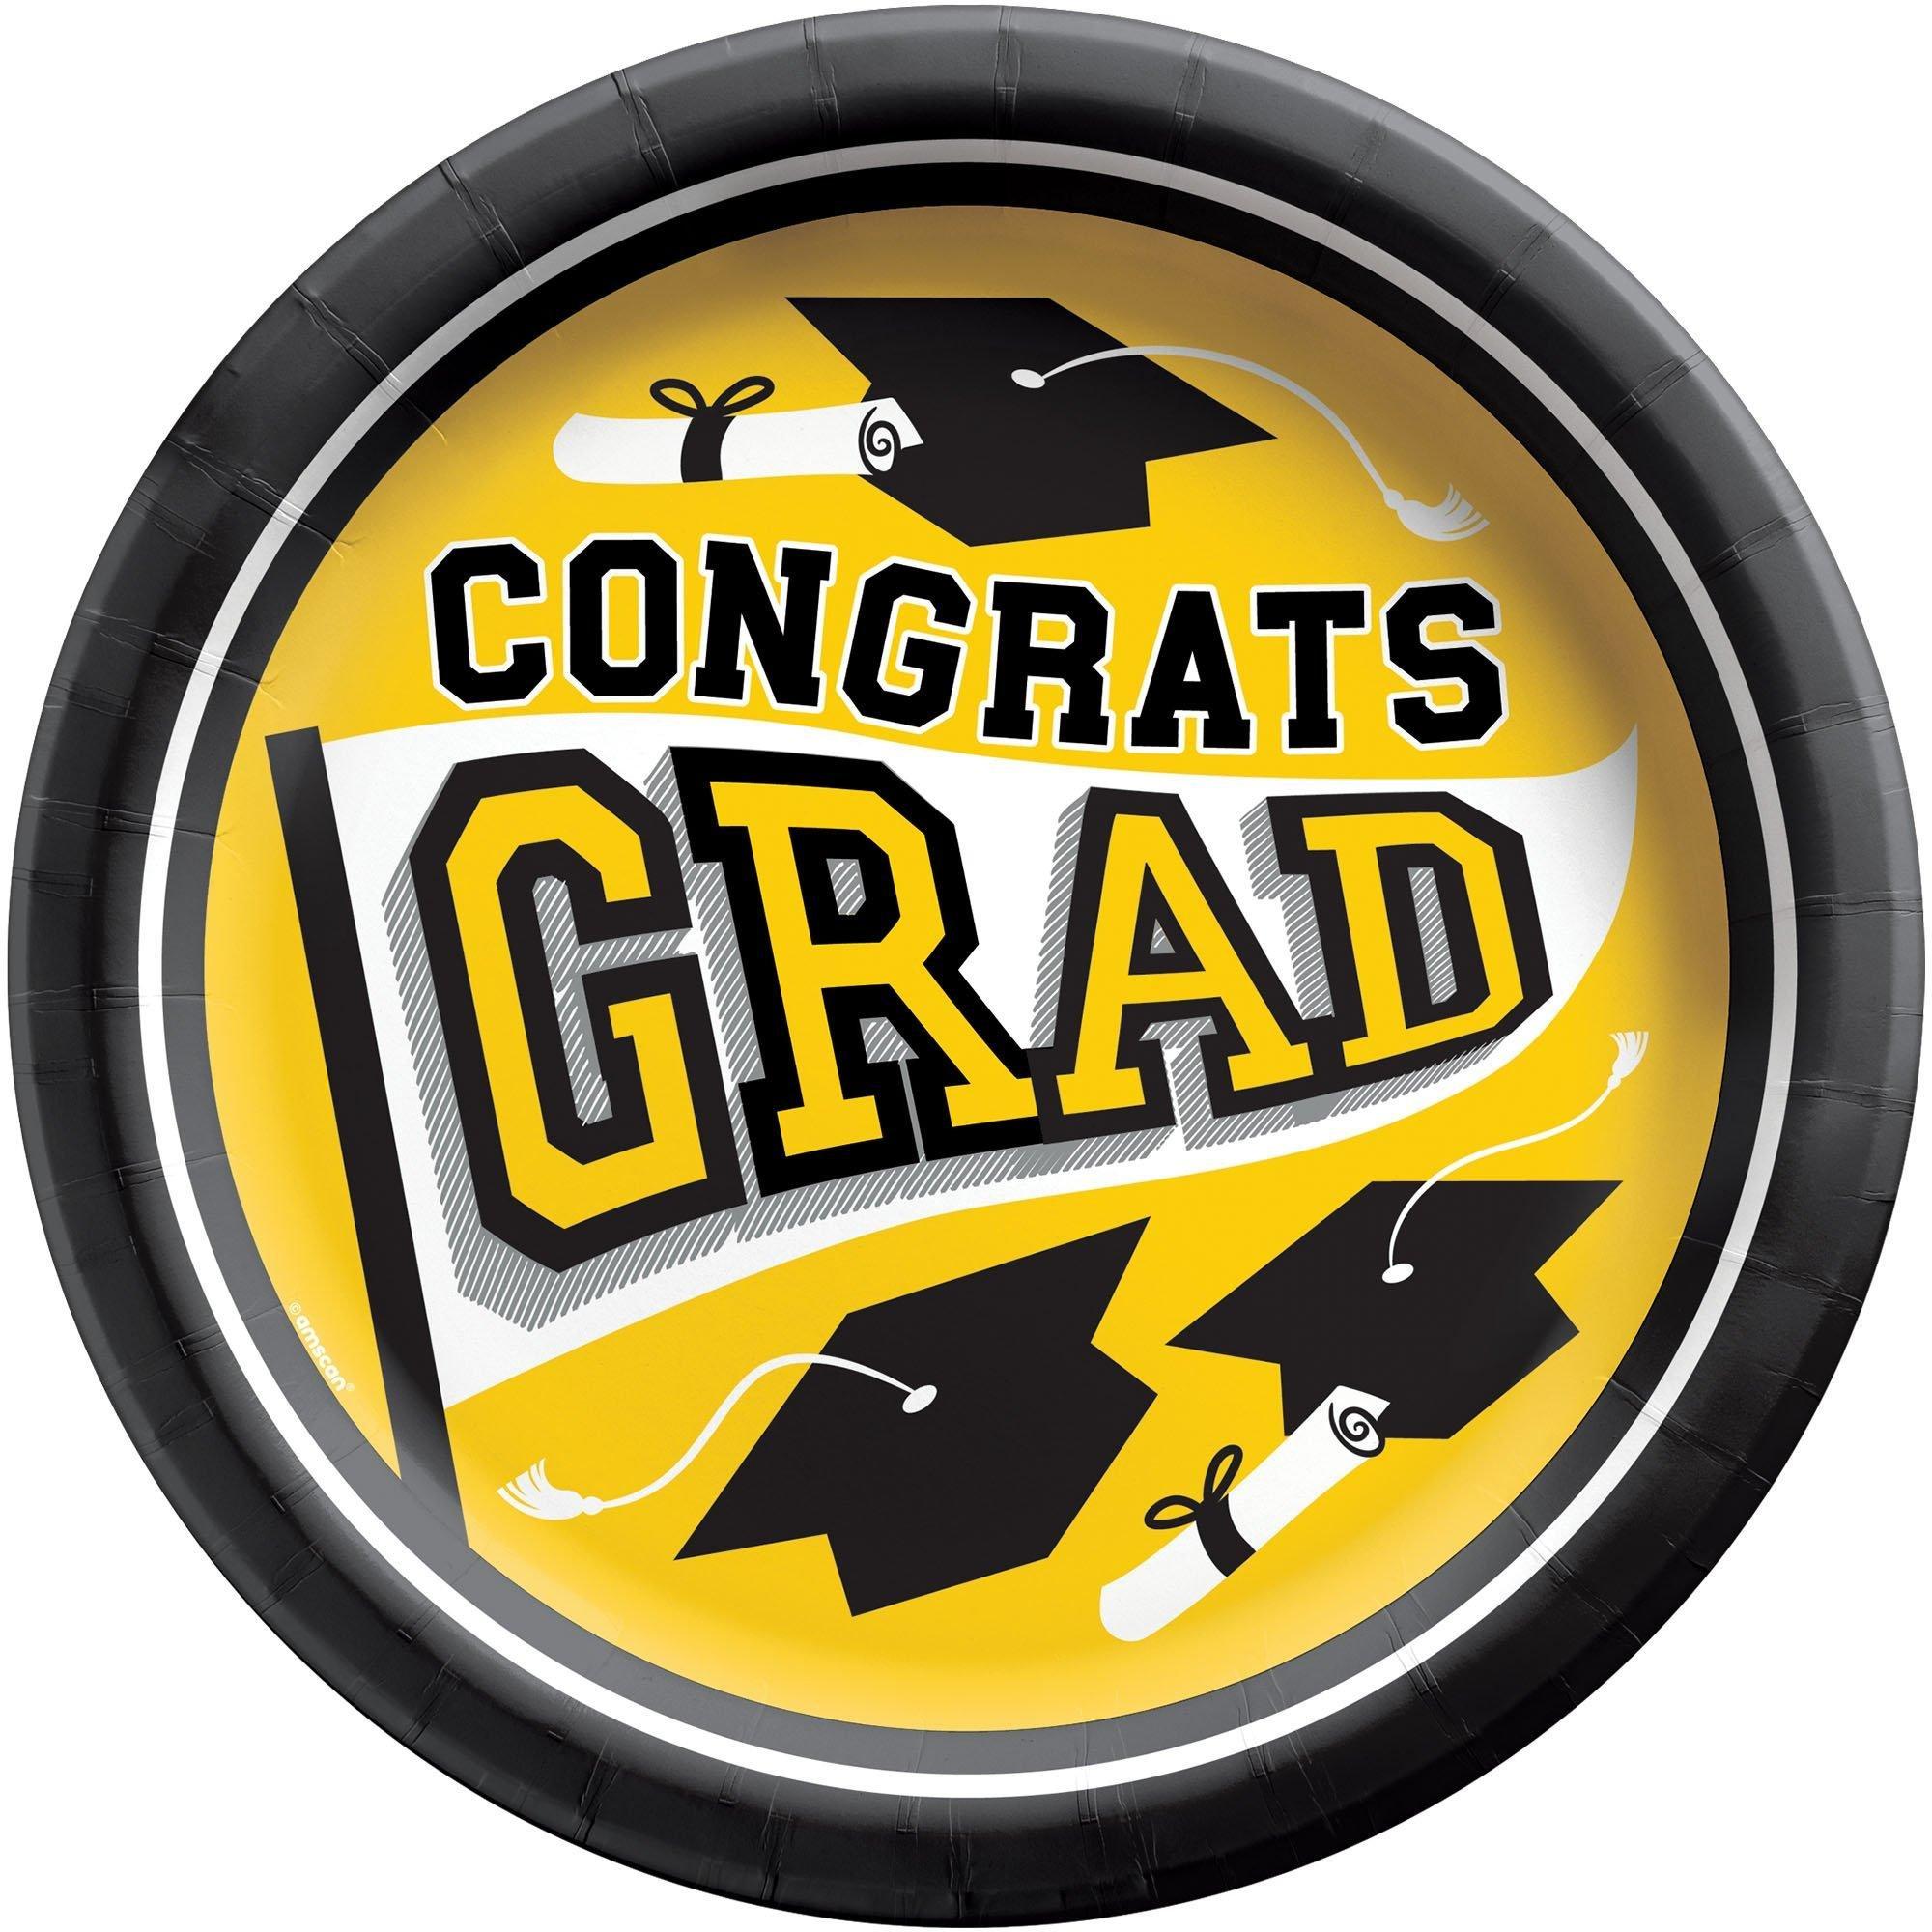 Graduation Party Supplies Kit for 40 with Decorations, Banners, Plates, Napkins, Cups - Yellow Congrats Grad